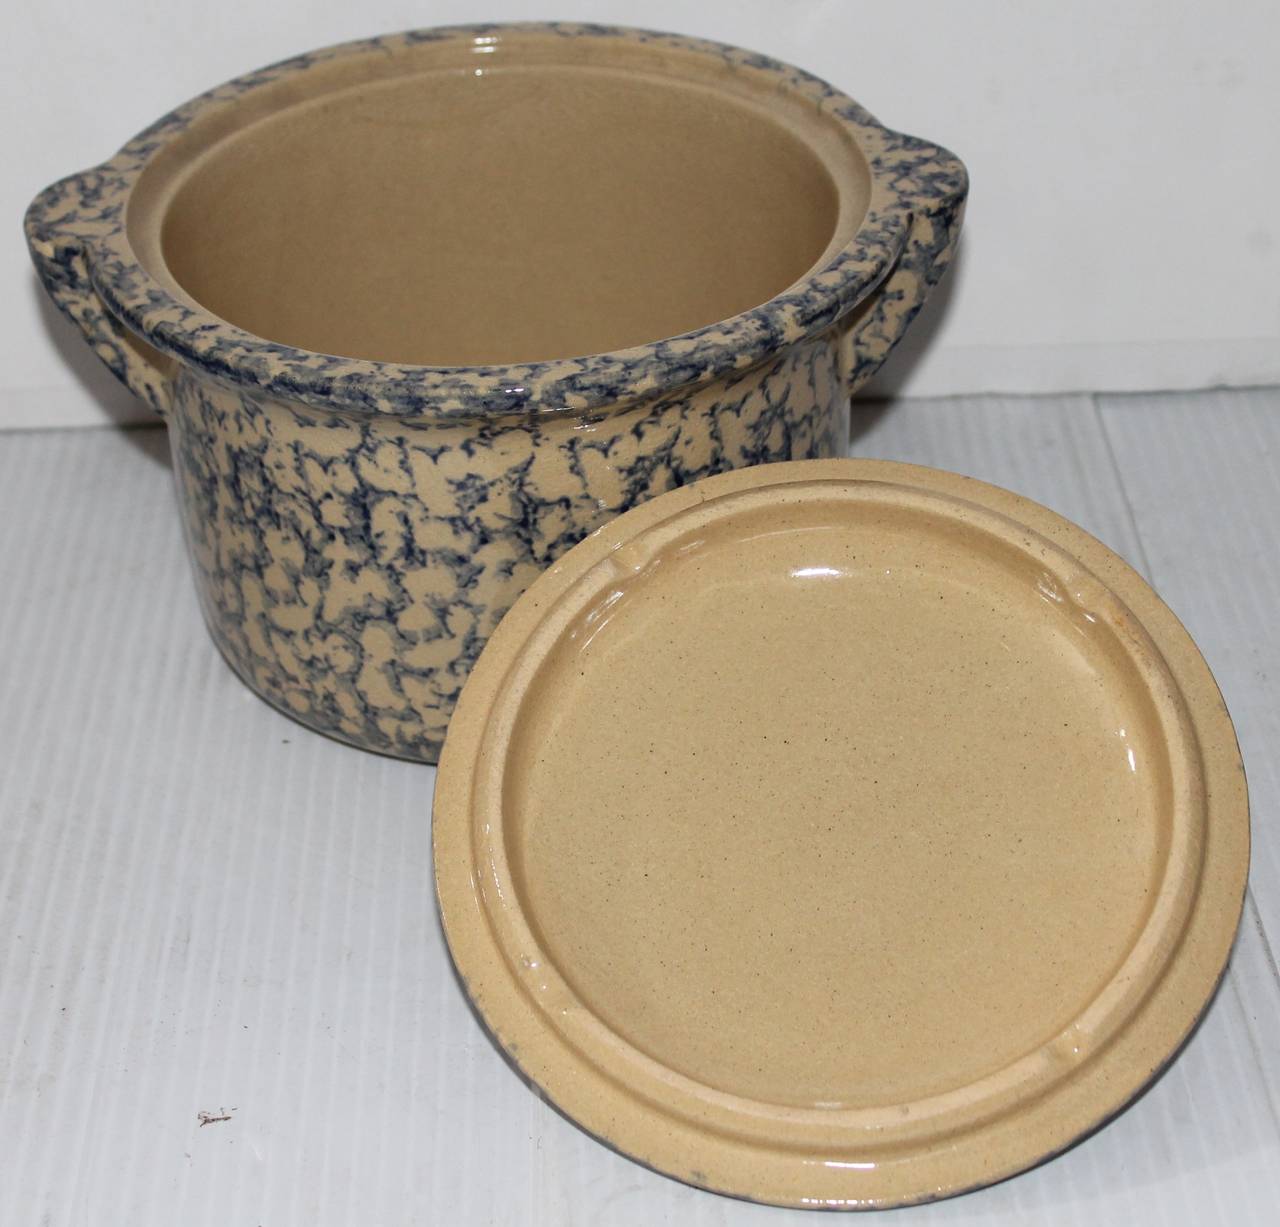 This early 20th century serving bowl comes out of a rare collection of spongeware. This item has been well taken care of and has minor wear consistent with age and use.